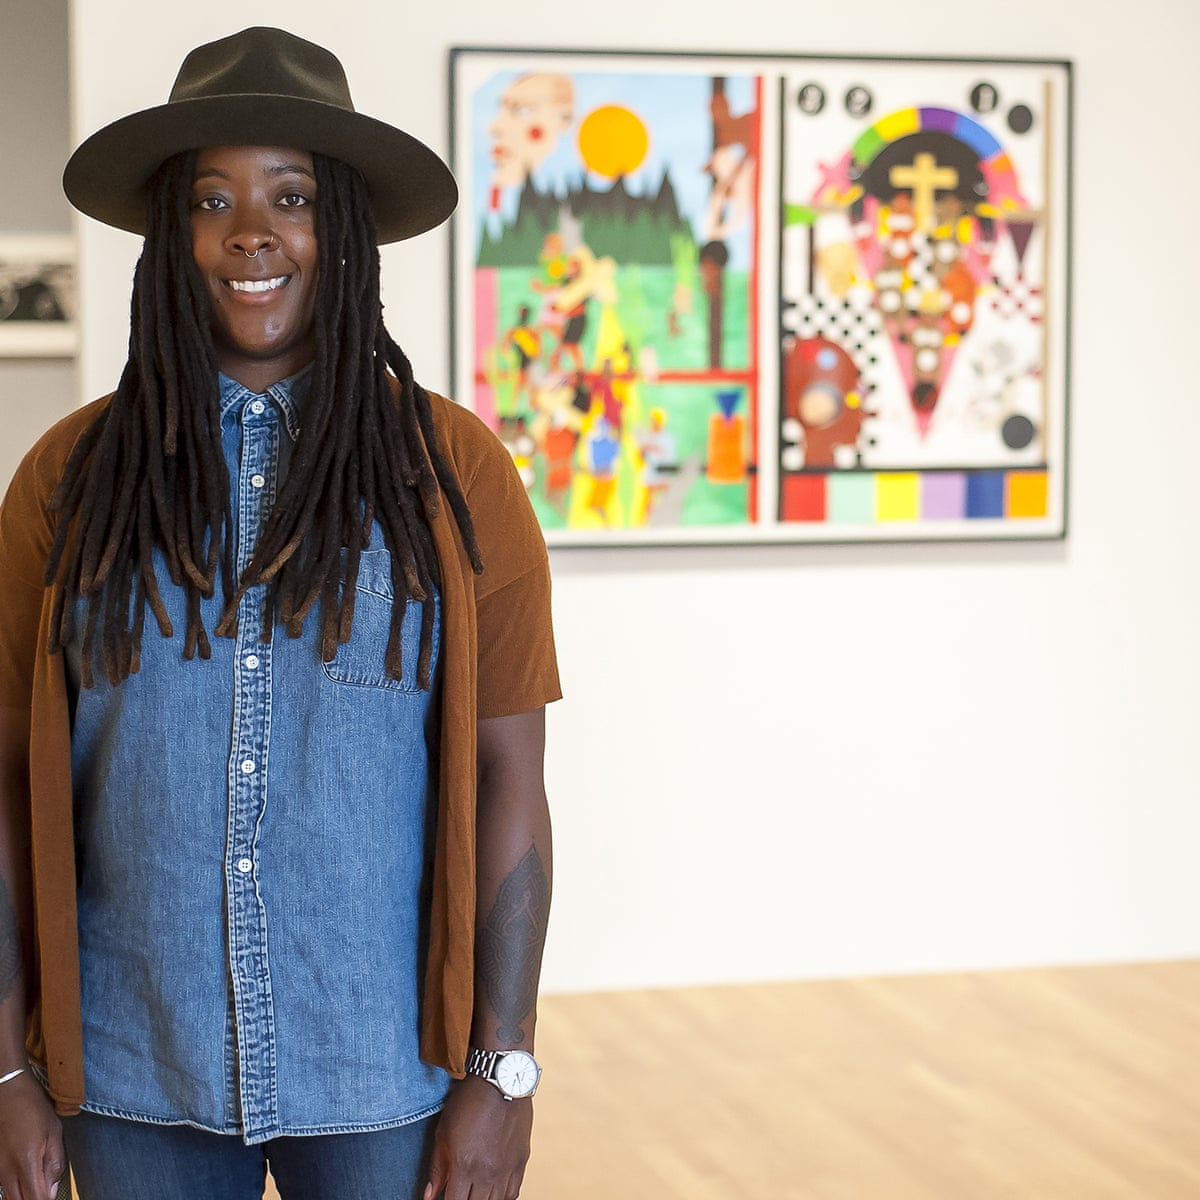 People are sometimes mad at me': behind Nina Chanel Abney's provocative art, Art